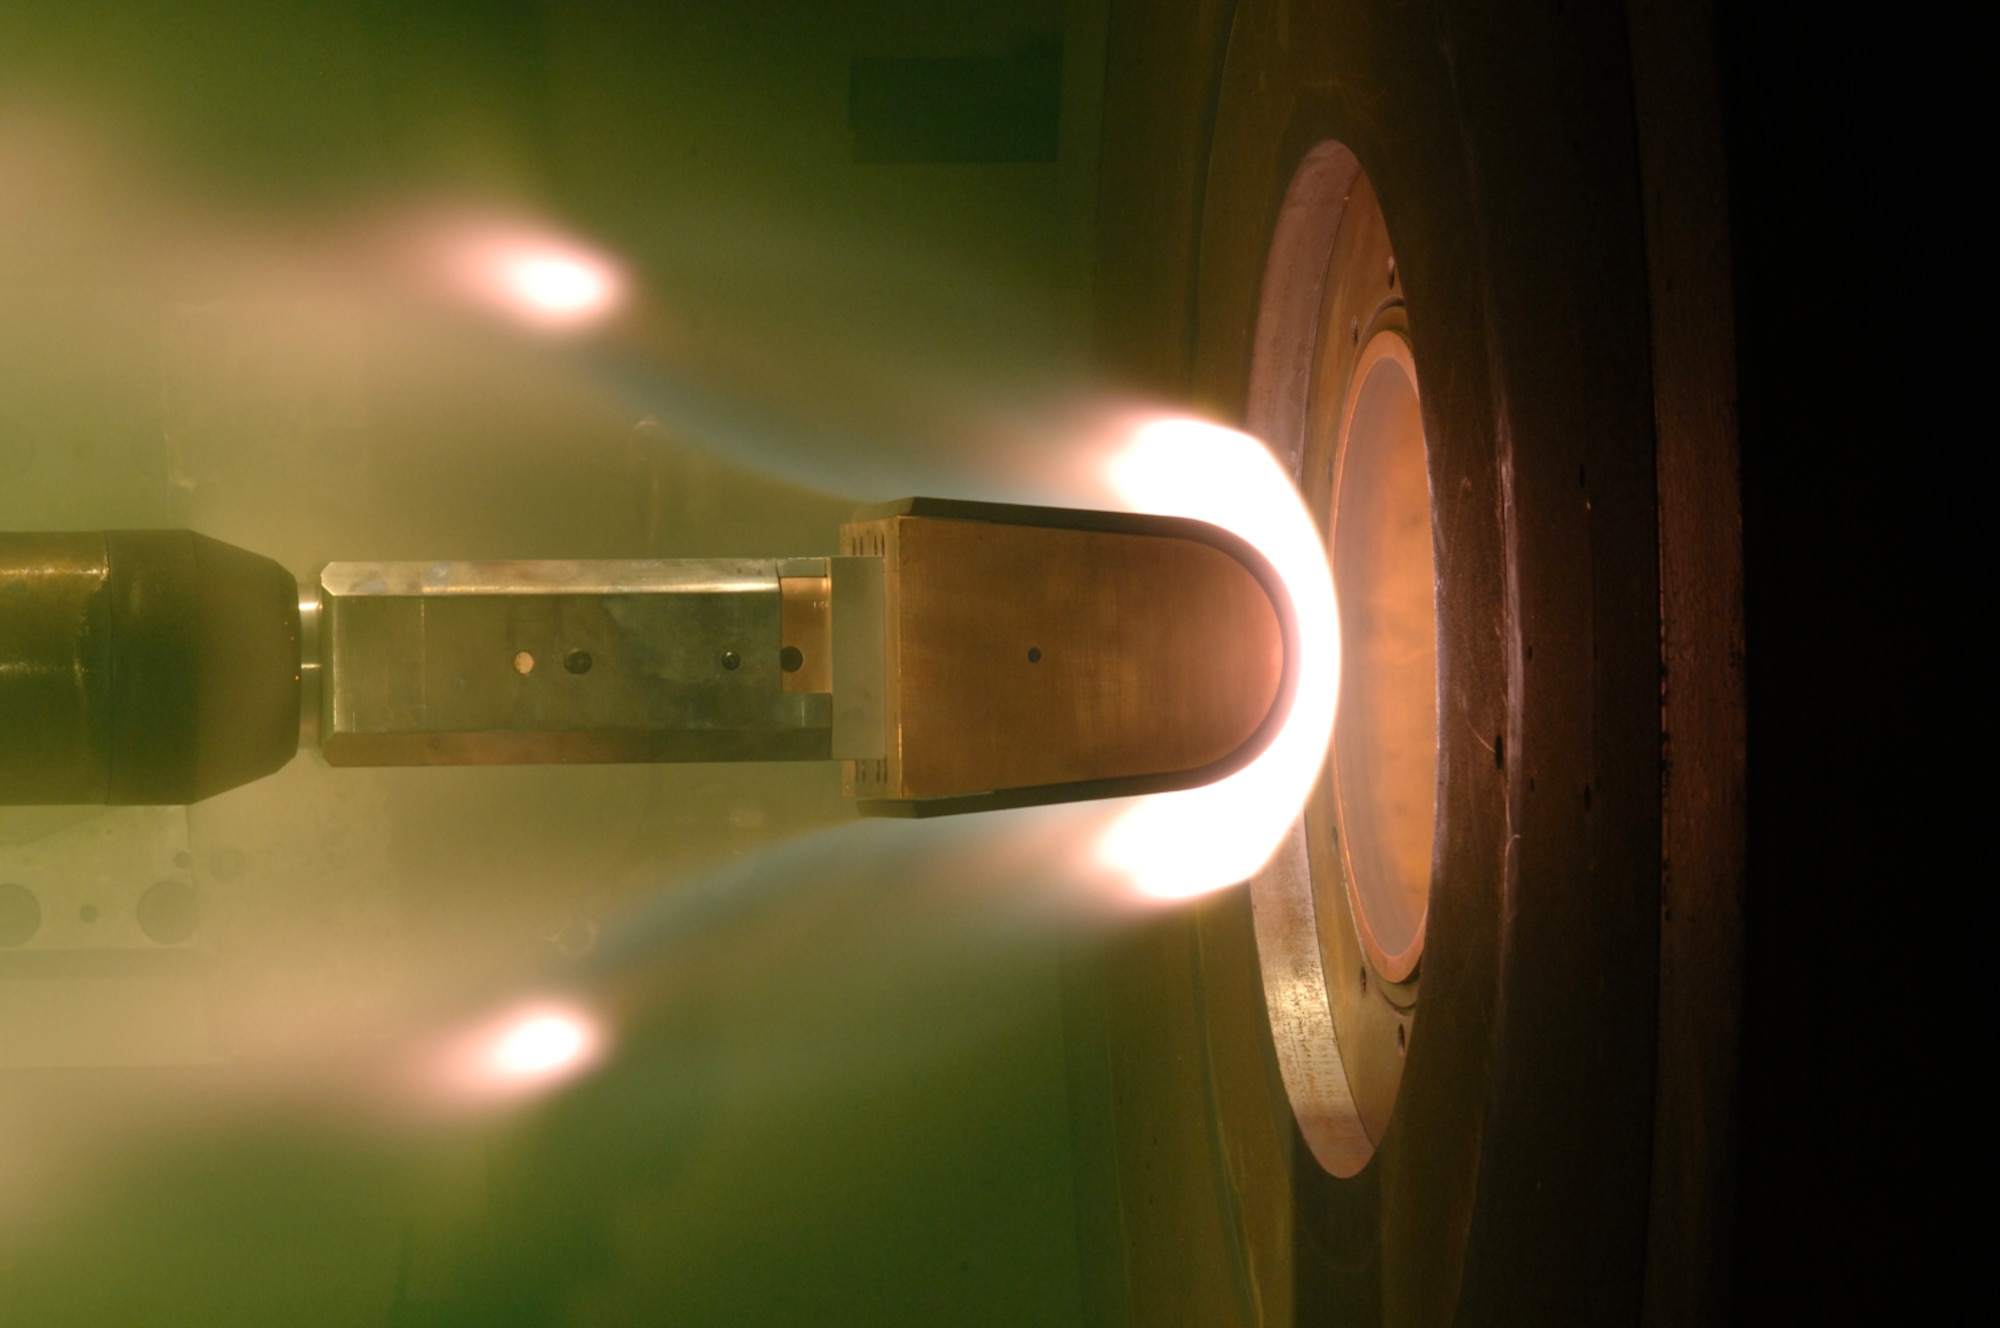 Pictured here are carbon-carbon leading edges under test in the 24-inch diameter nozzle in Arc Heater H-2 for the HTV-3 technology program during 2007. This is representative of the type of testing H-2 would conduct, but with the new mid-range capability, it would be possible to simulate higher enthalpies at mid-altitude shear conditions and longer run times, like those experienced by long-range global strike vehicles (AEDC file photo)